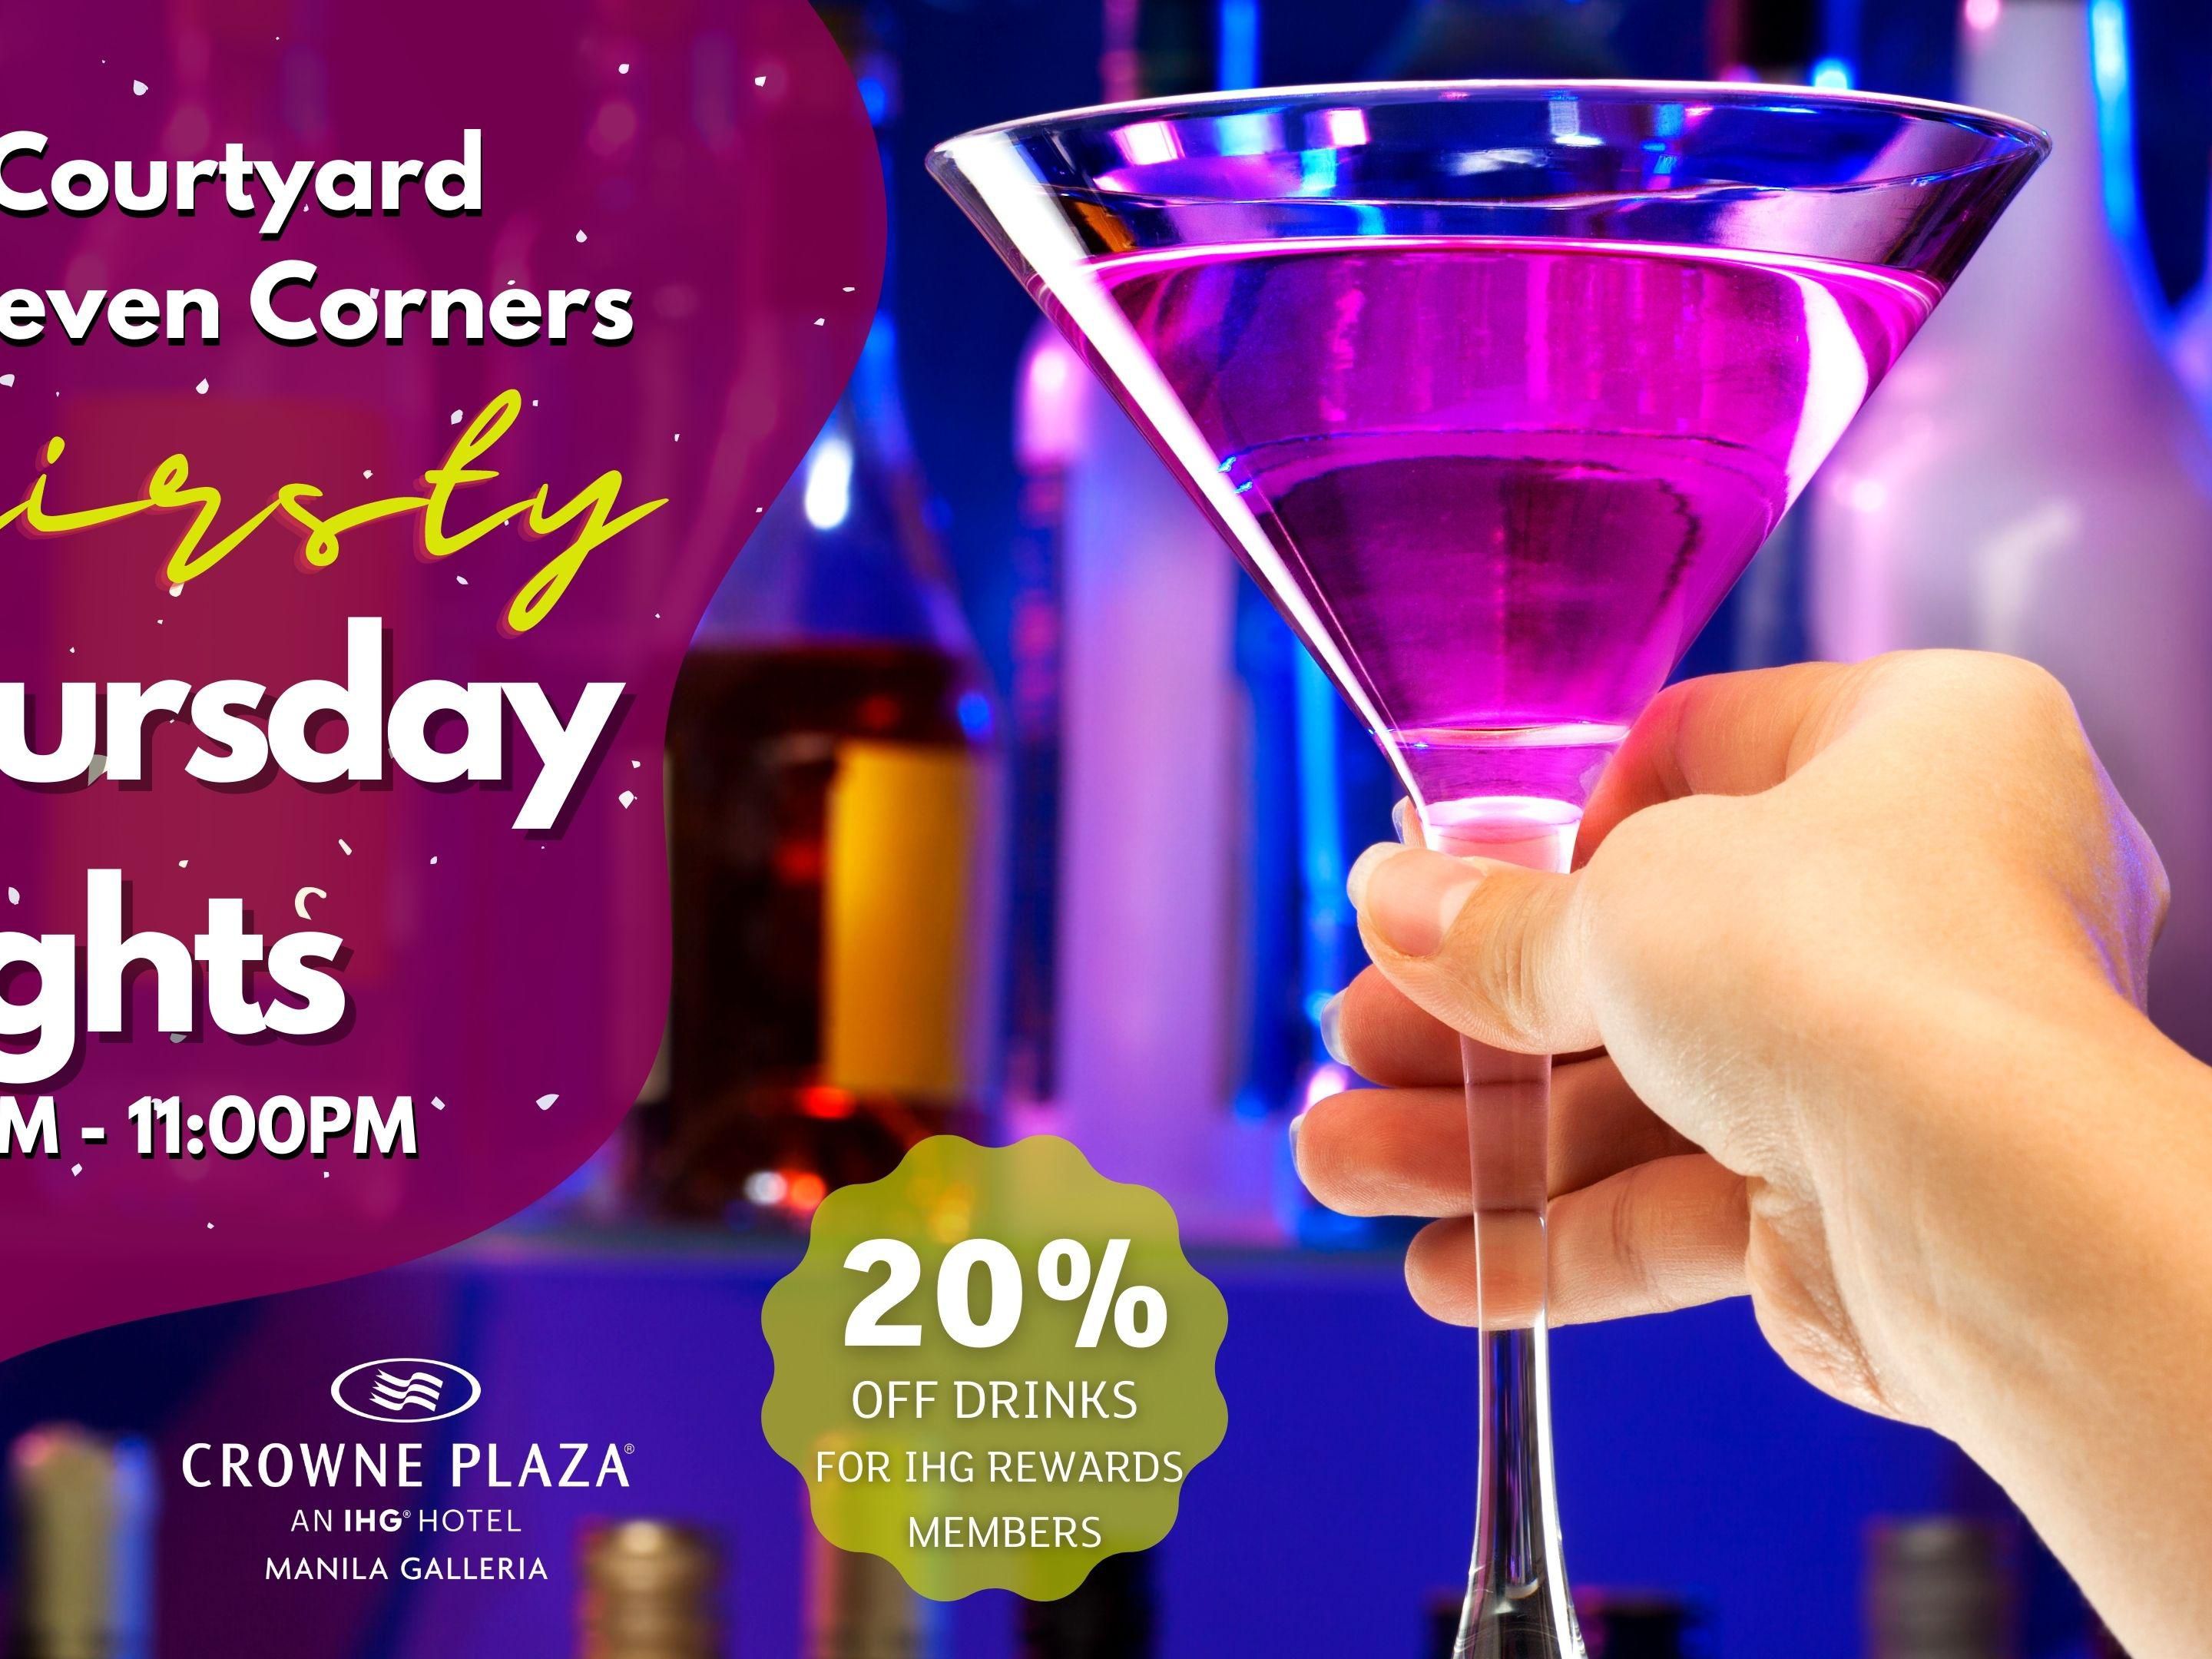 Thirsty Thursdays at the Courtyard